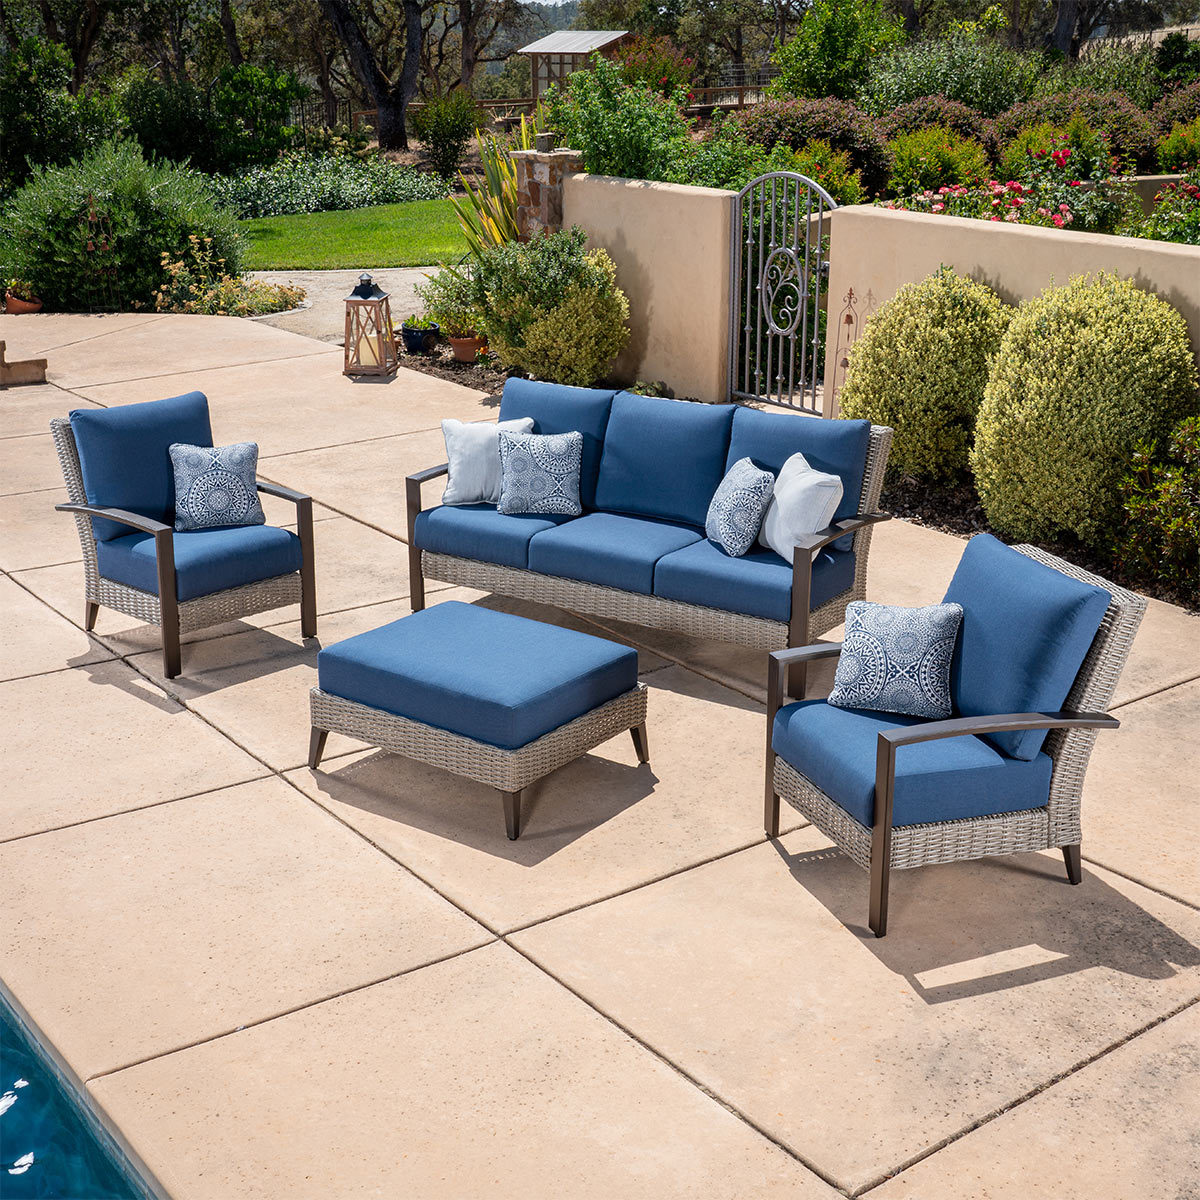 Foremost Delano 4 Piece Woven Deep Seating Set